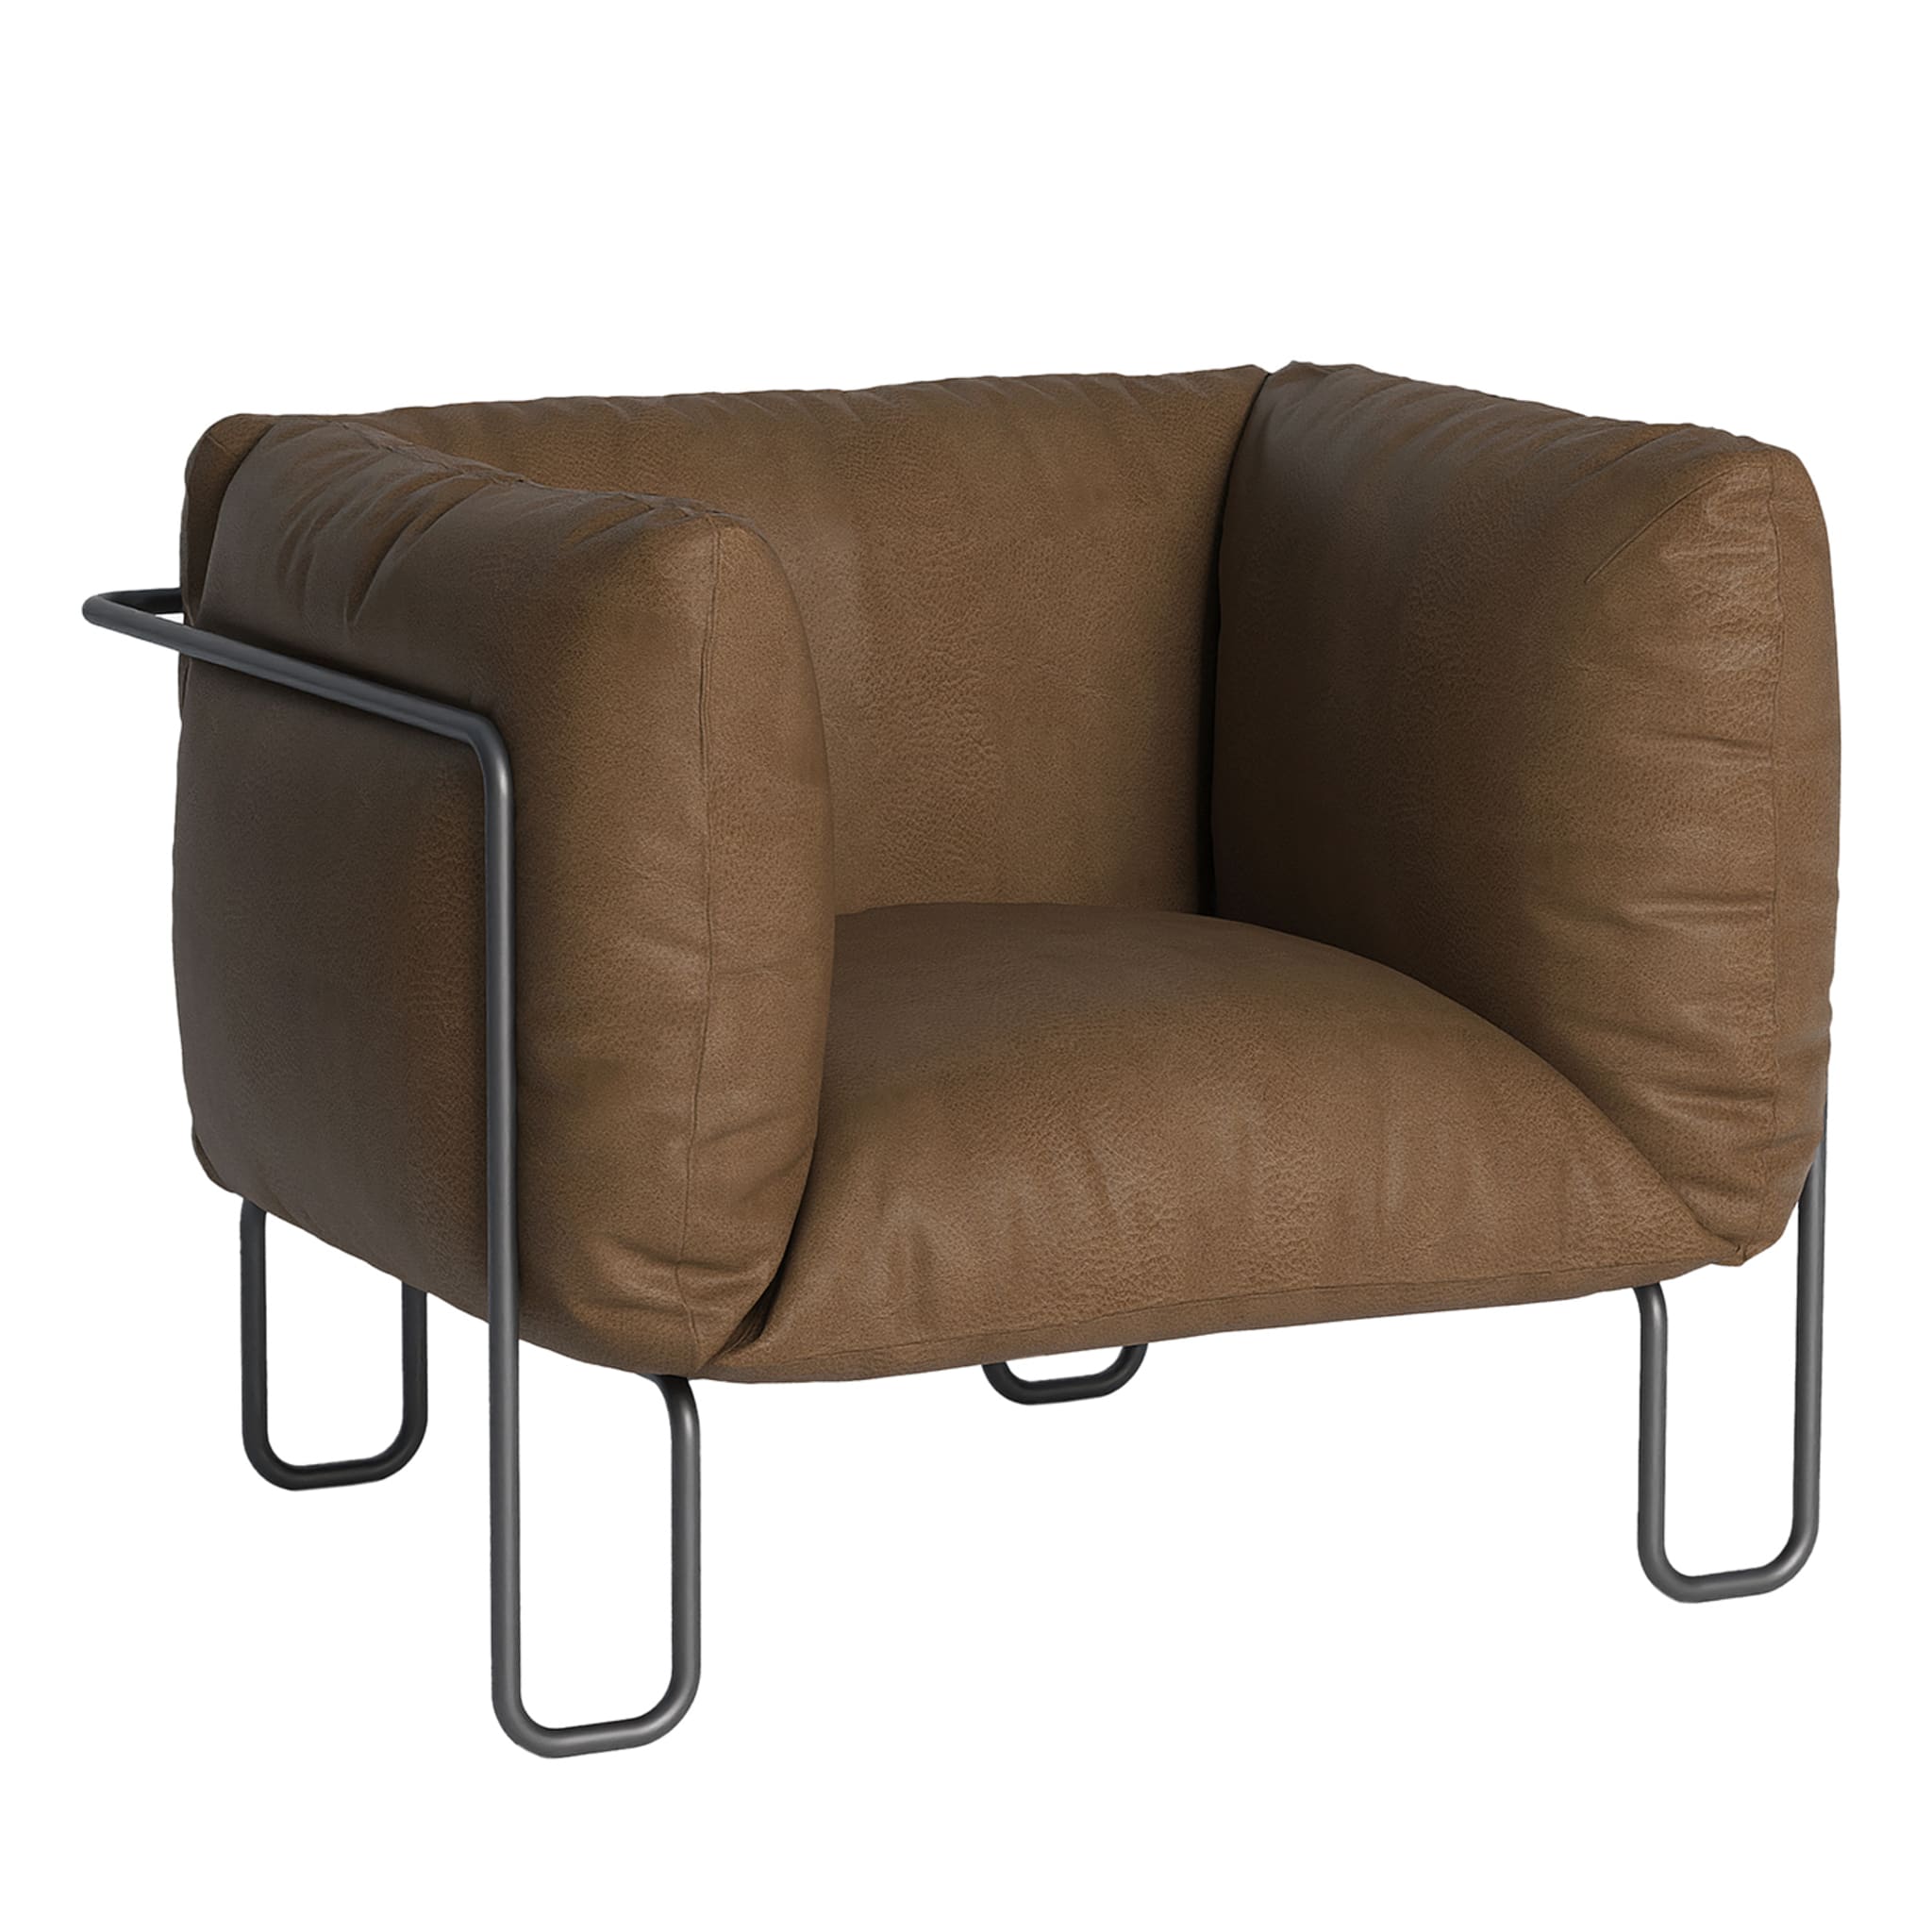 Fargo Soft 80 Tobacco Leather Armchair - Main view